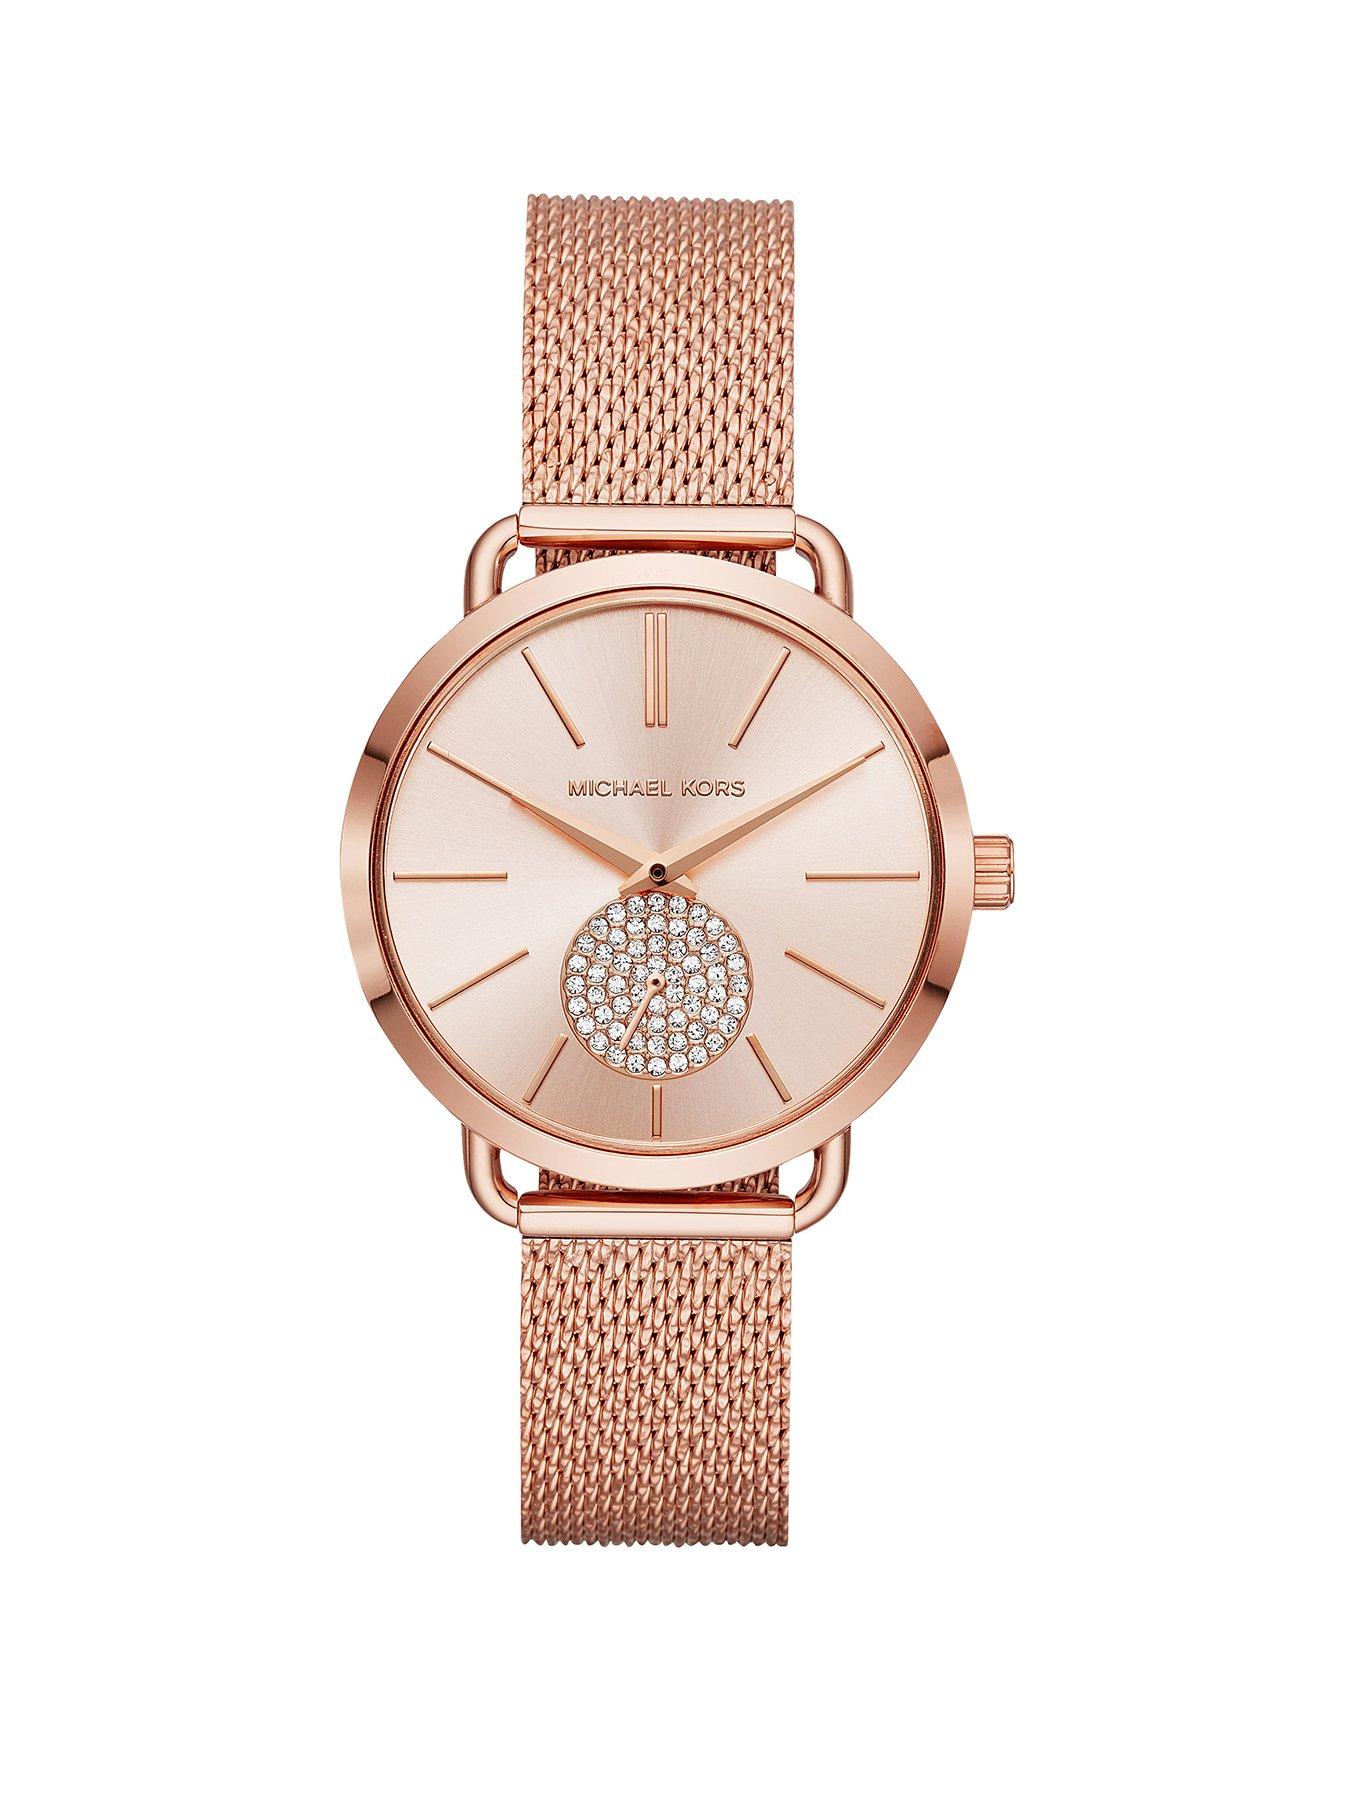 Gifts For Her | Michael kors | www.very 